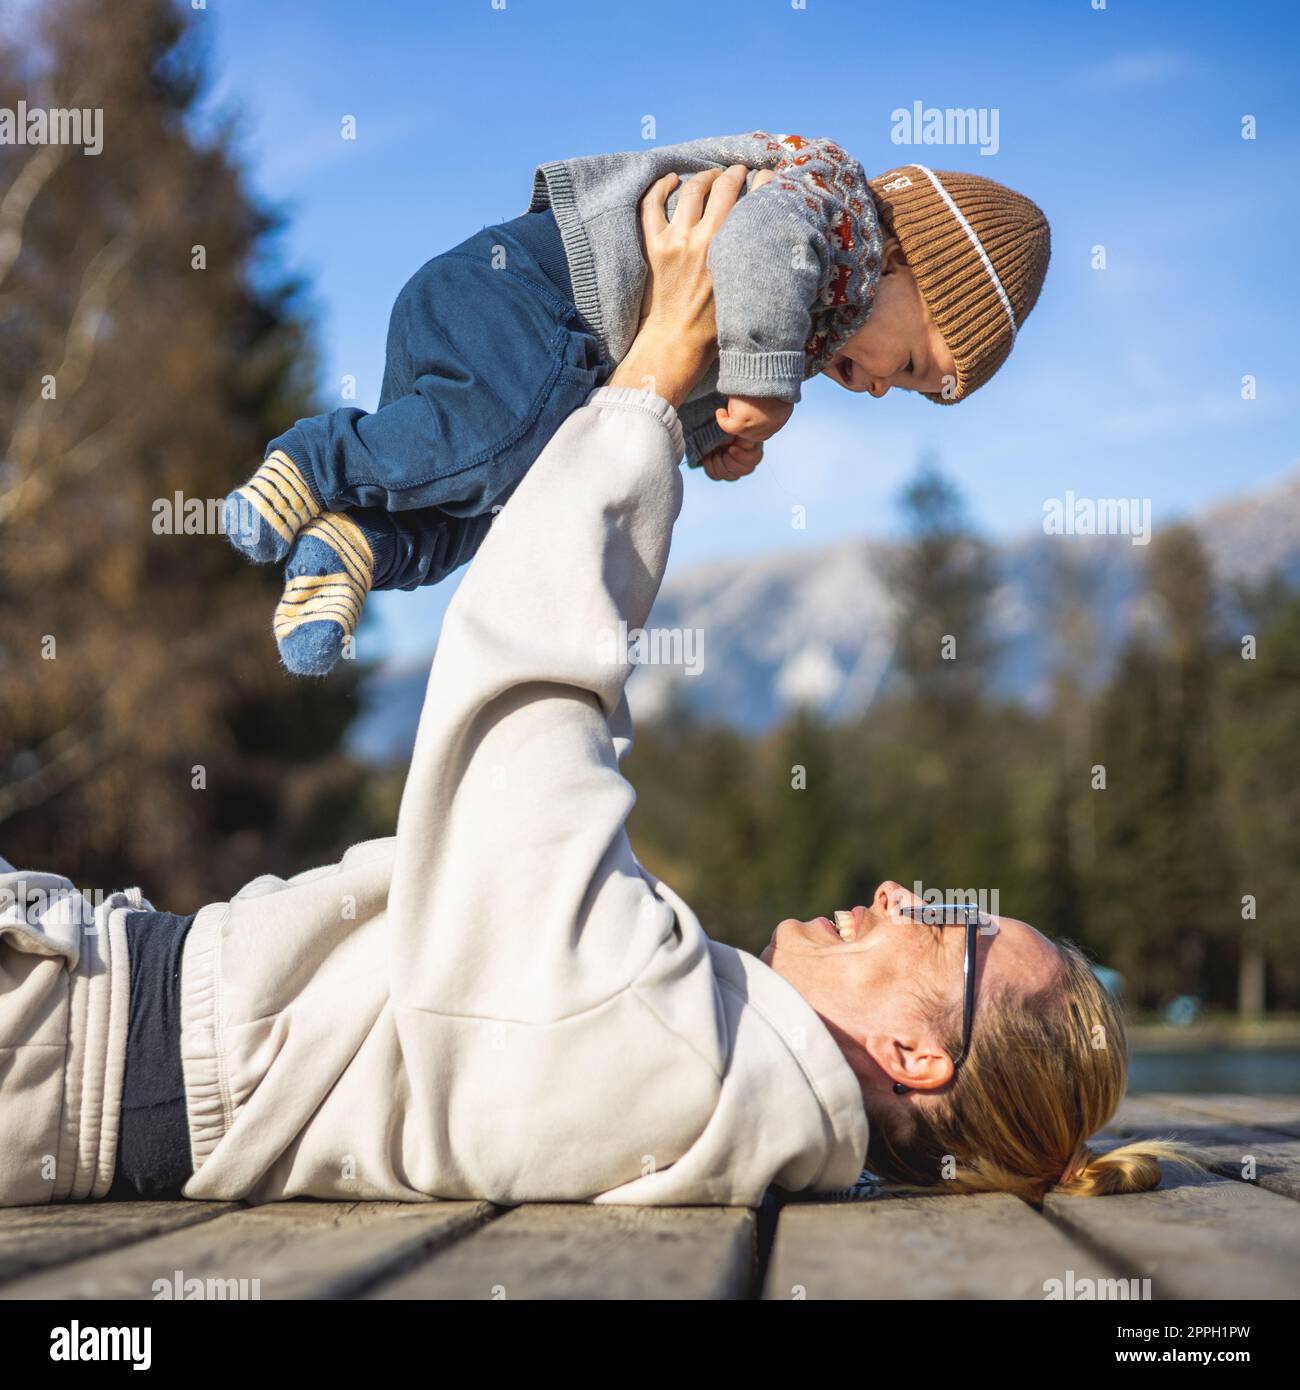 Happy family. Young mother playing with her baby boy infant oudoors on sunny autumn day. Portrait of mom and little son on wooden platform by lake. Positive human emotions, feelings, joy. Stock Photo